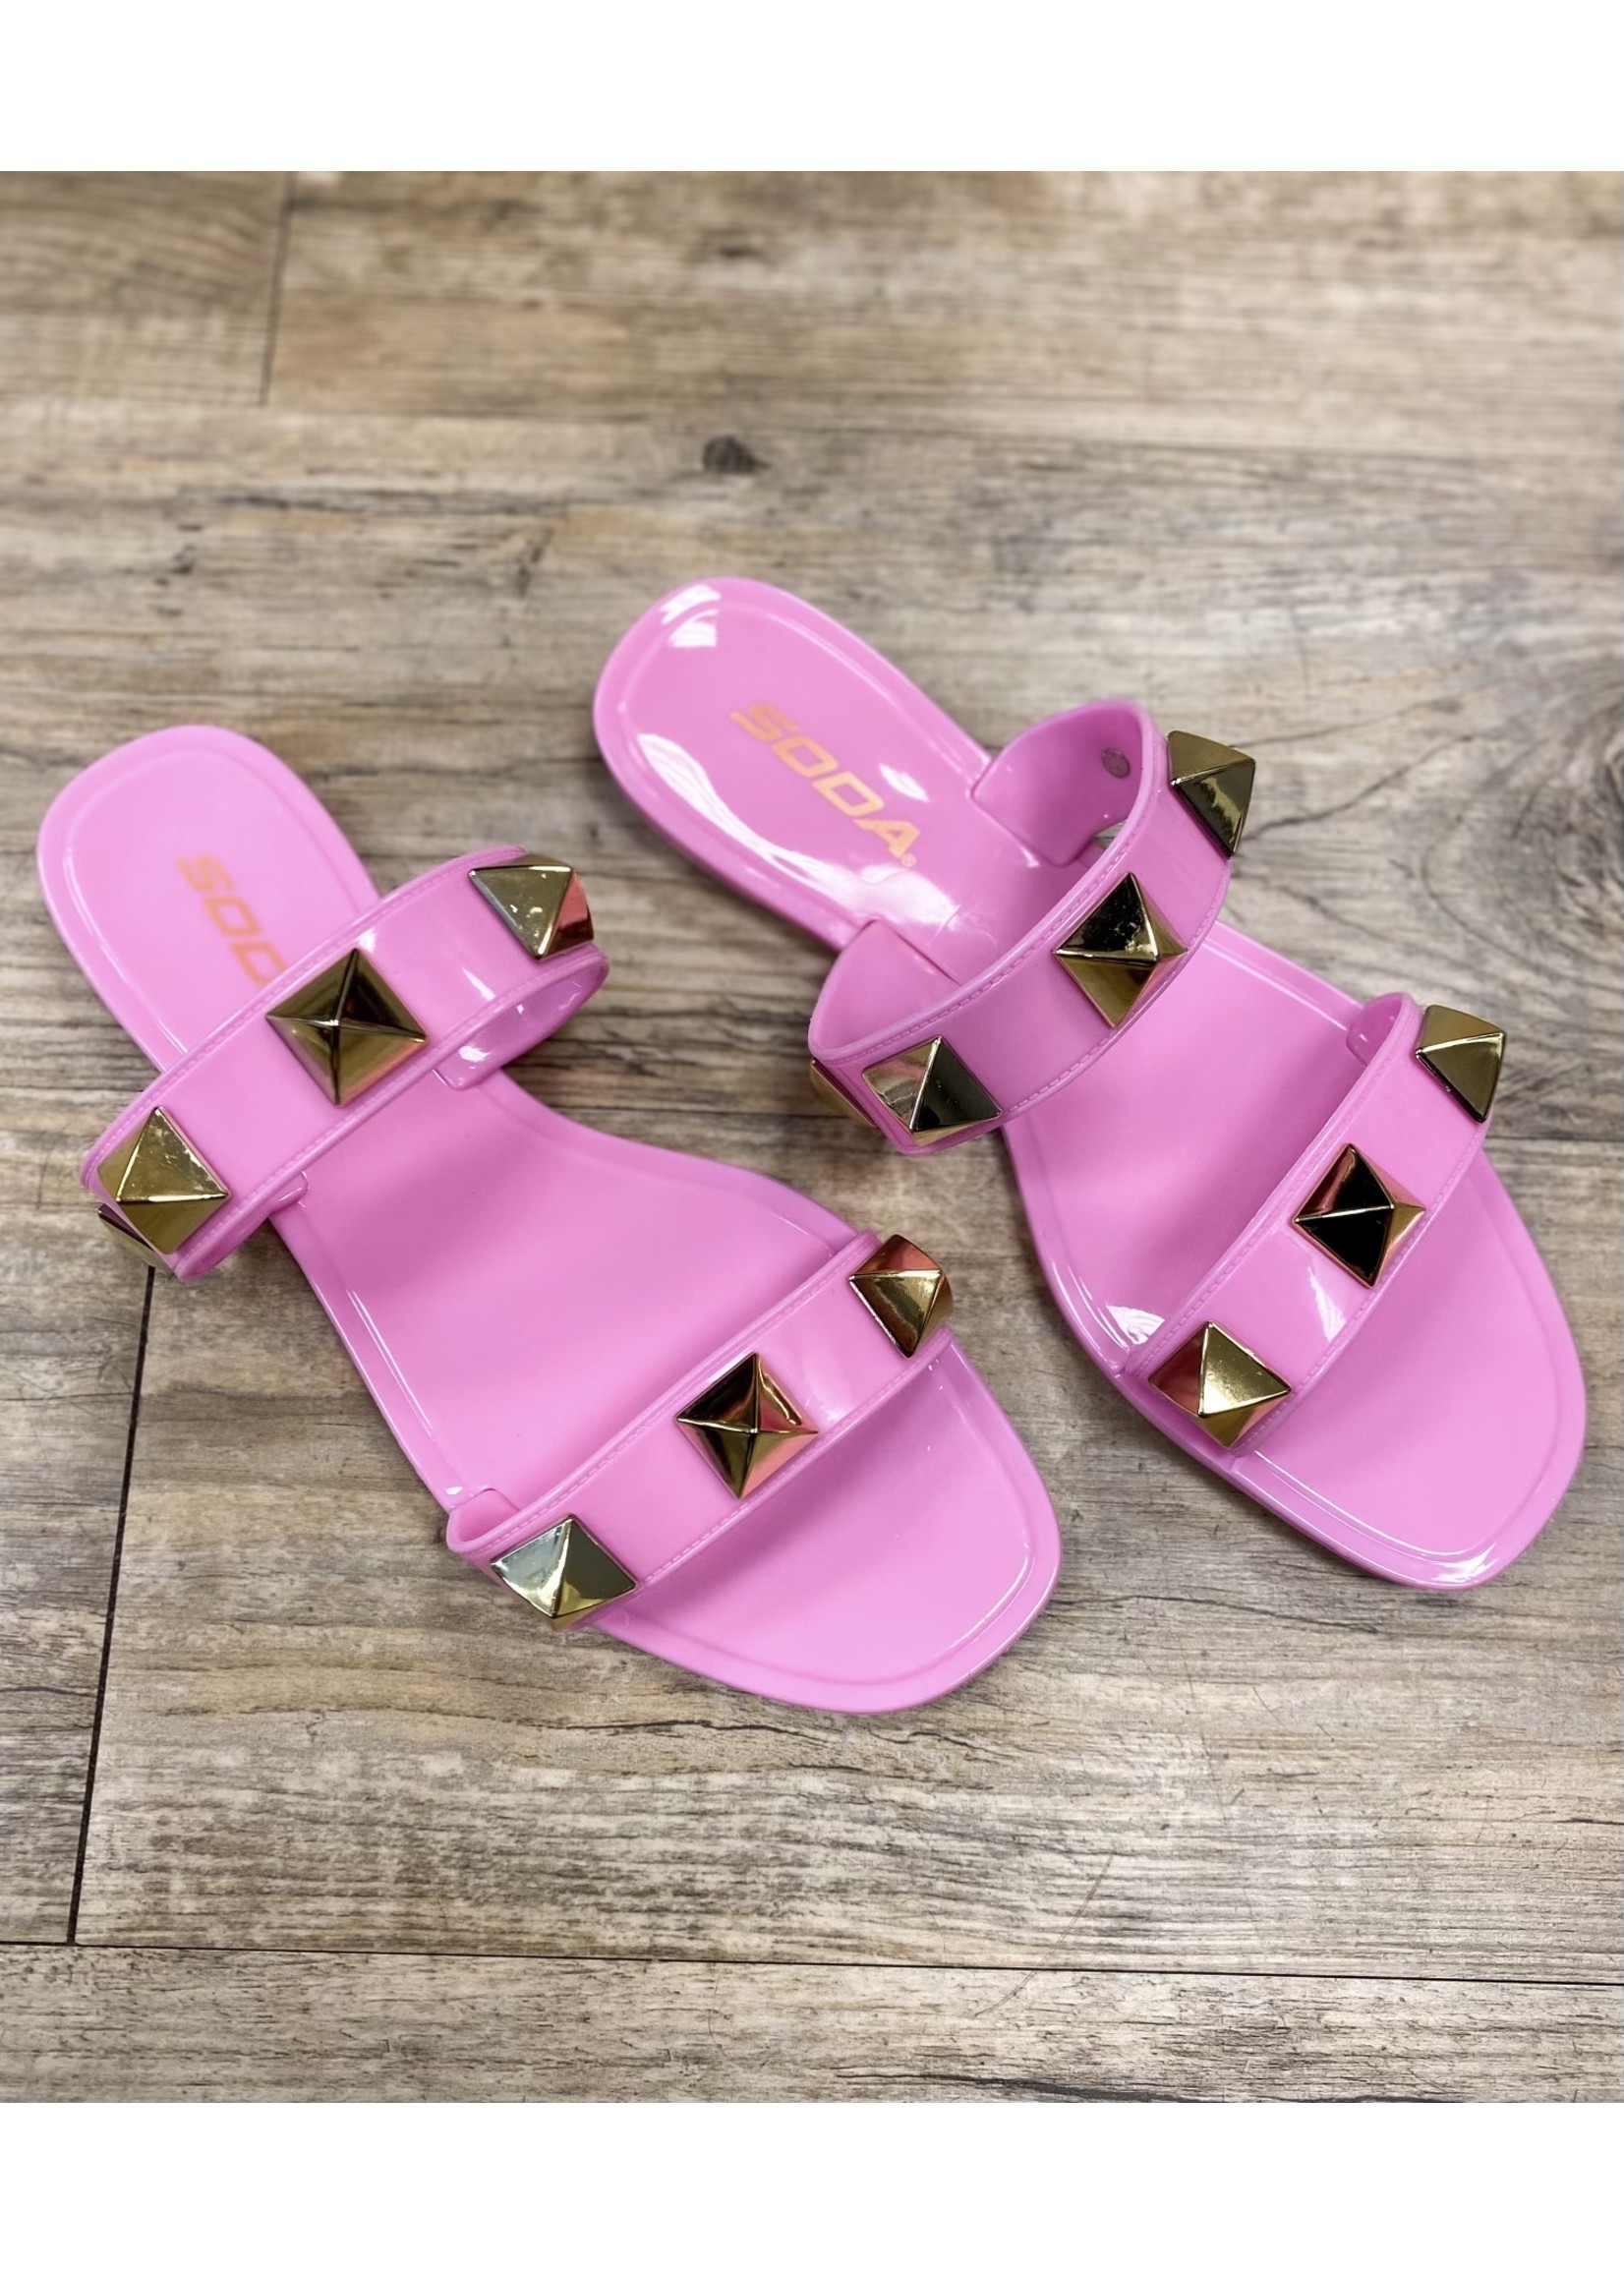 The Barbie Studded Sandals - Pink